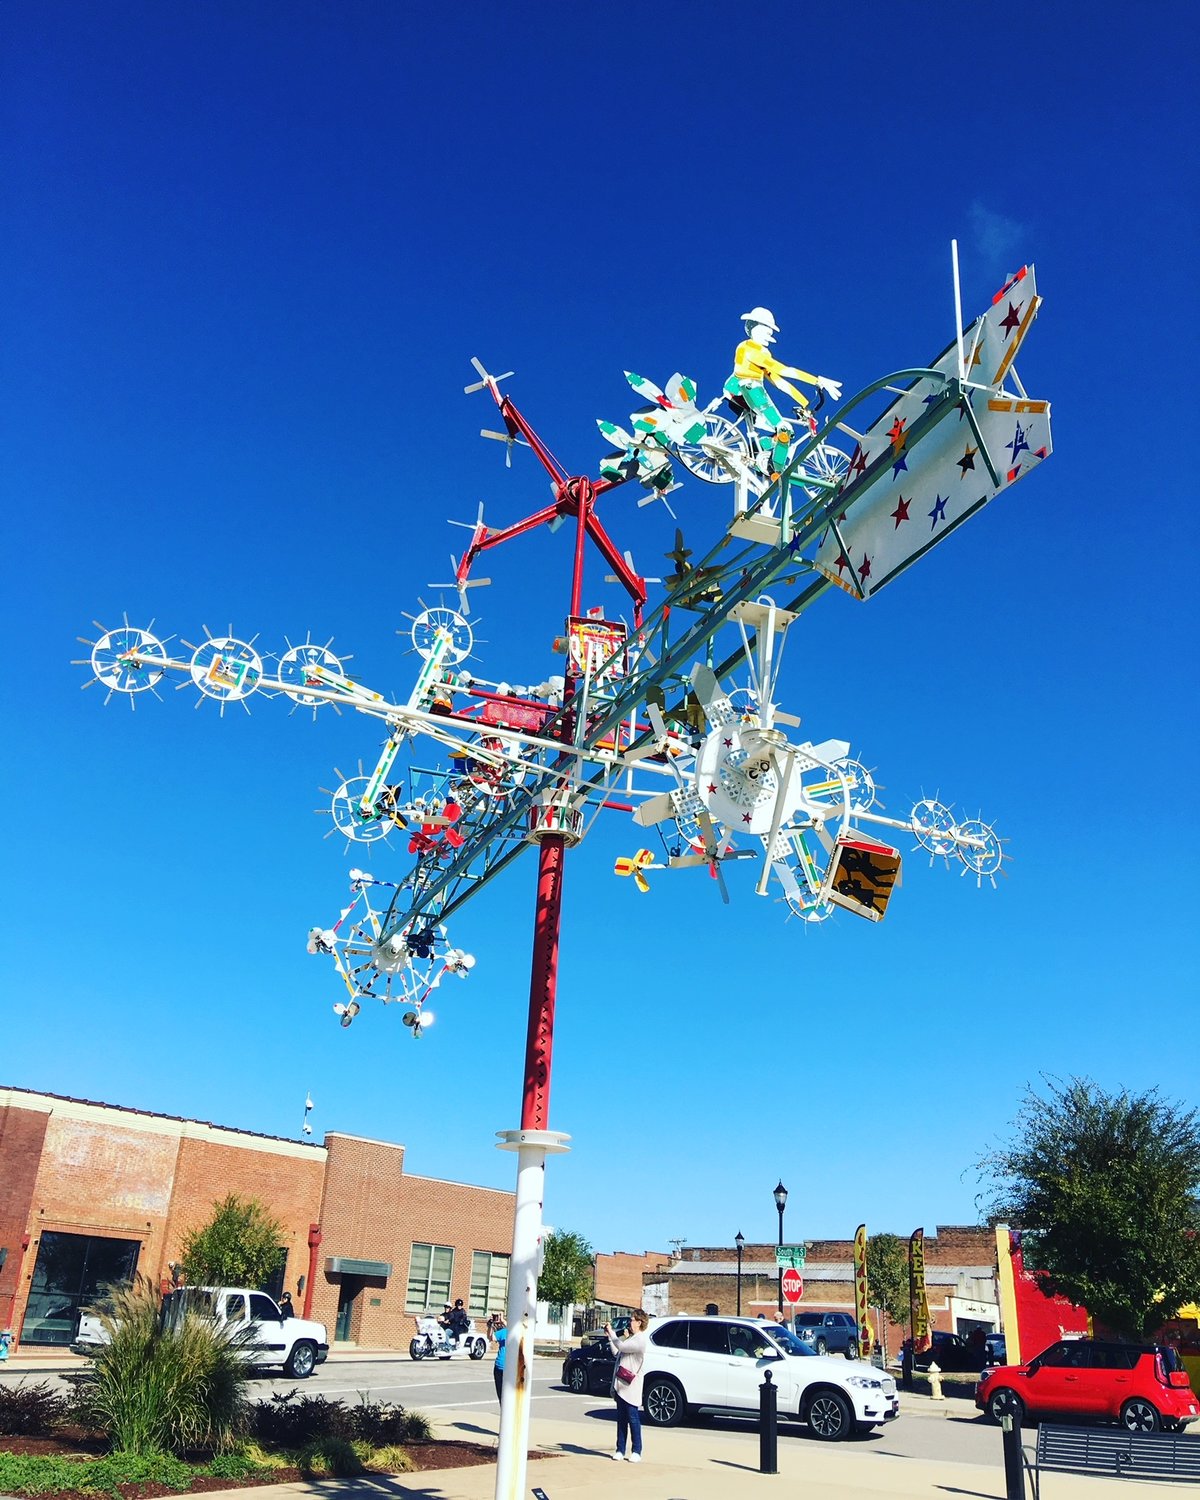 The Vollis Simpson Whirligig Park and Museum is at 301 Goldsboro St. S. in historic downtown Wilson. It’s about an hour’s drive north of Fayetteville, via Interstate 95.